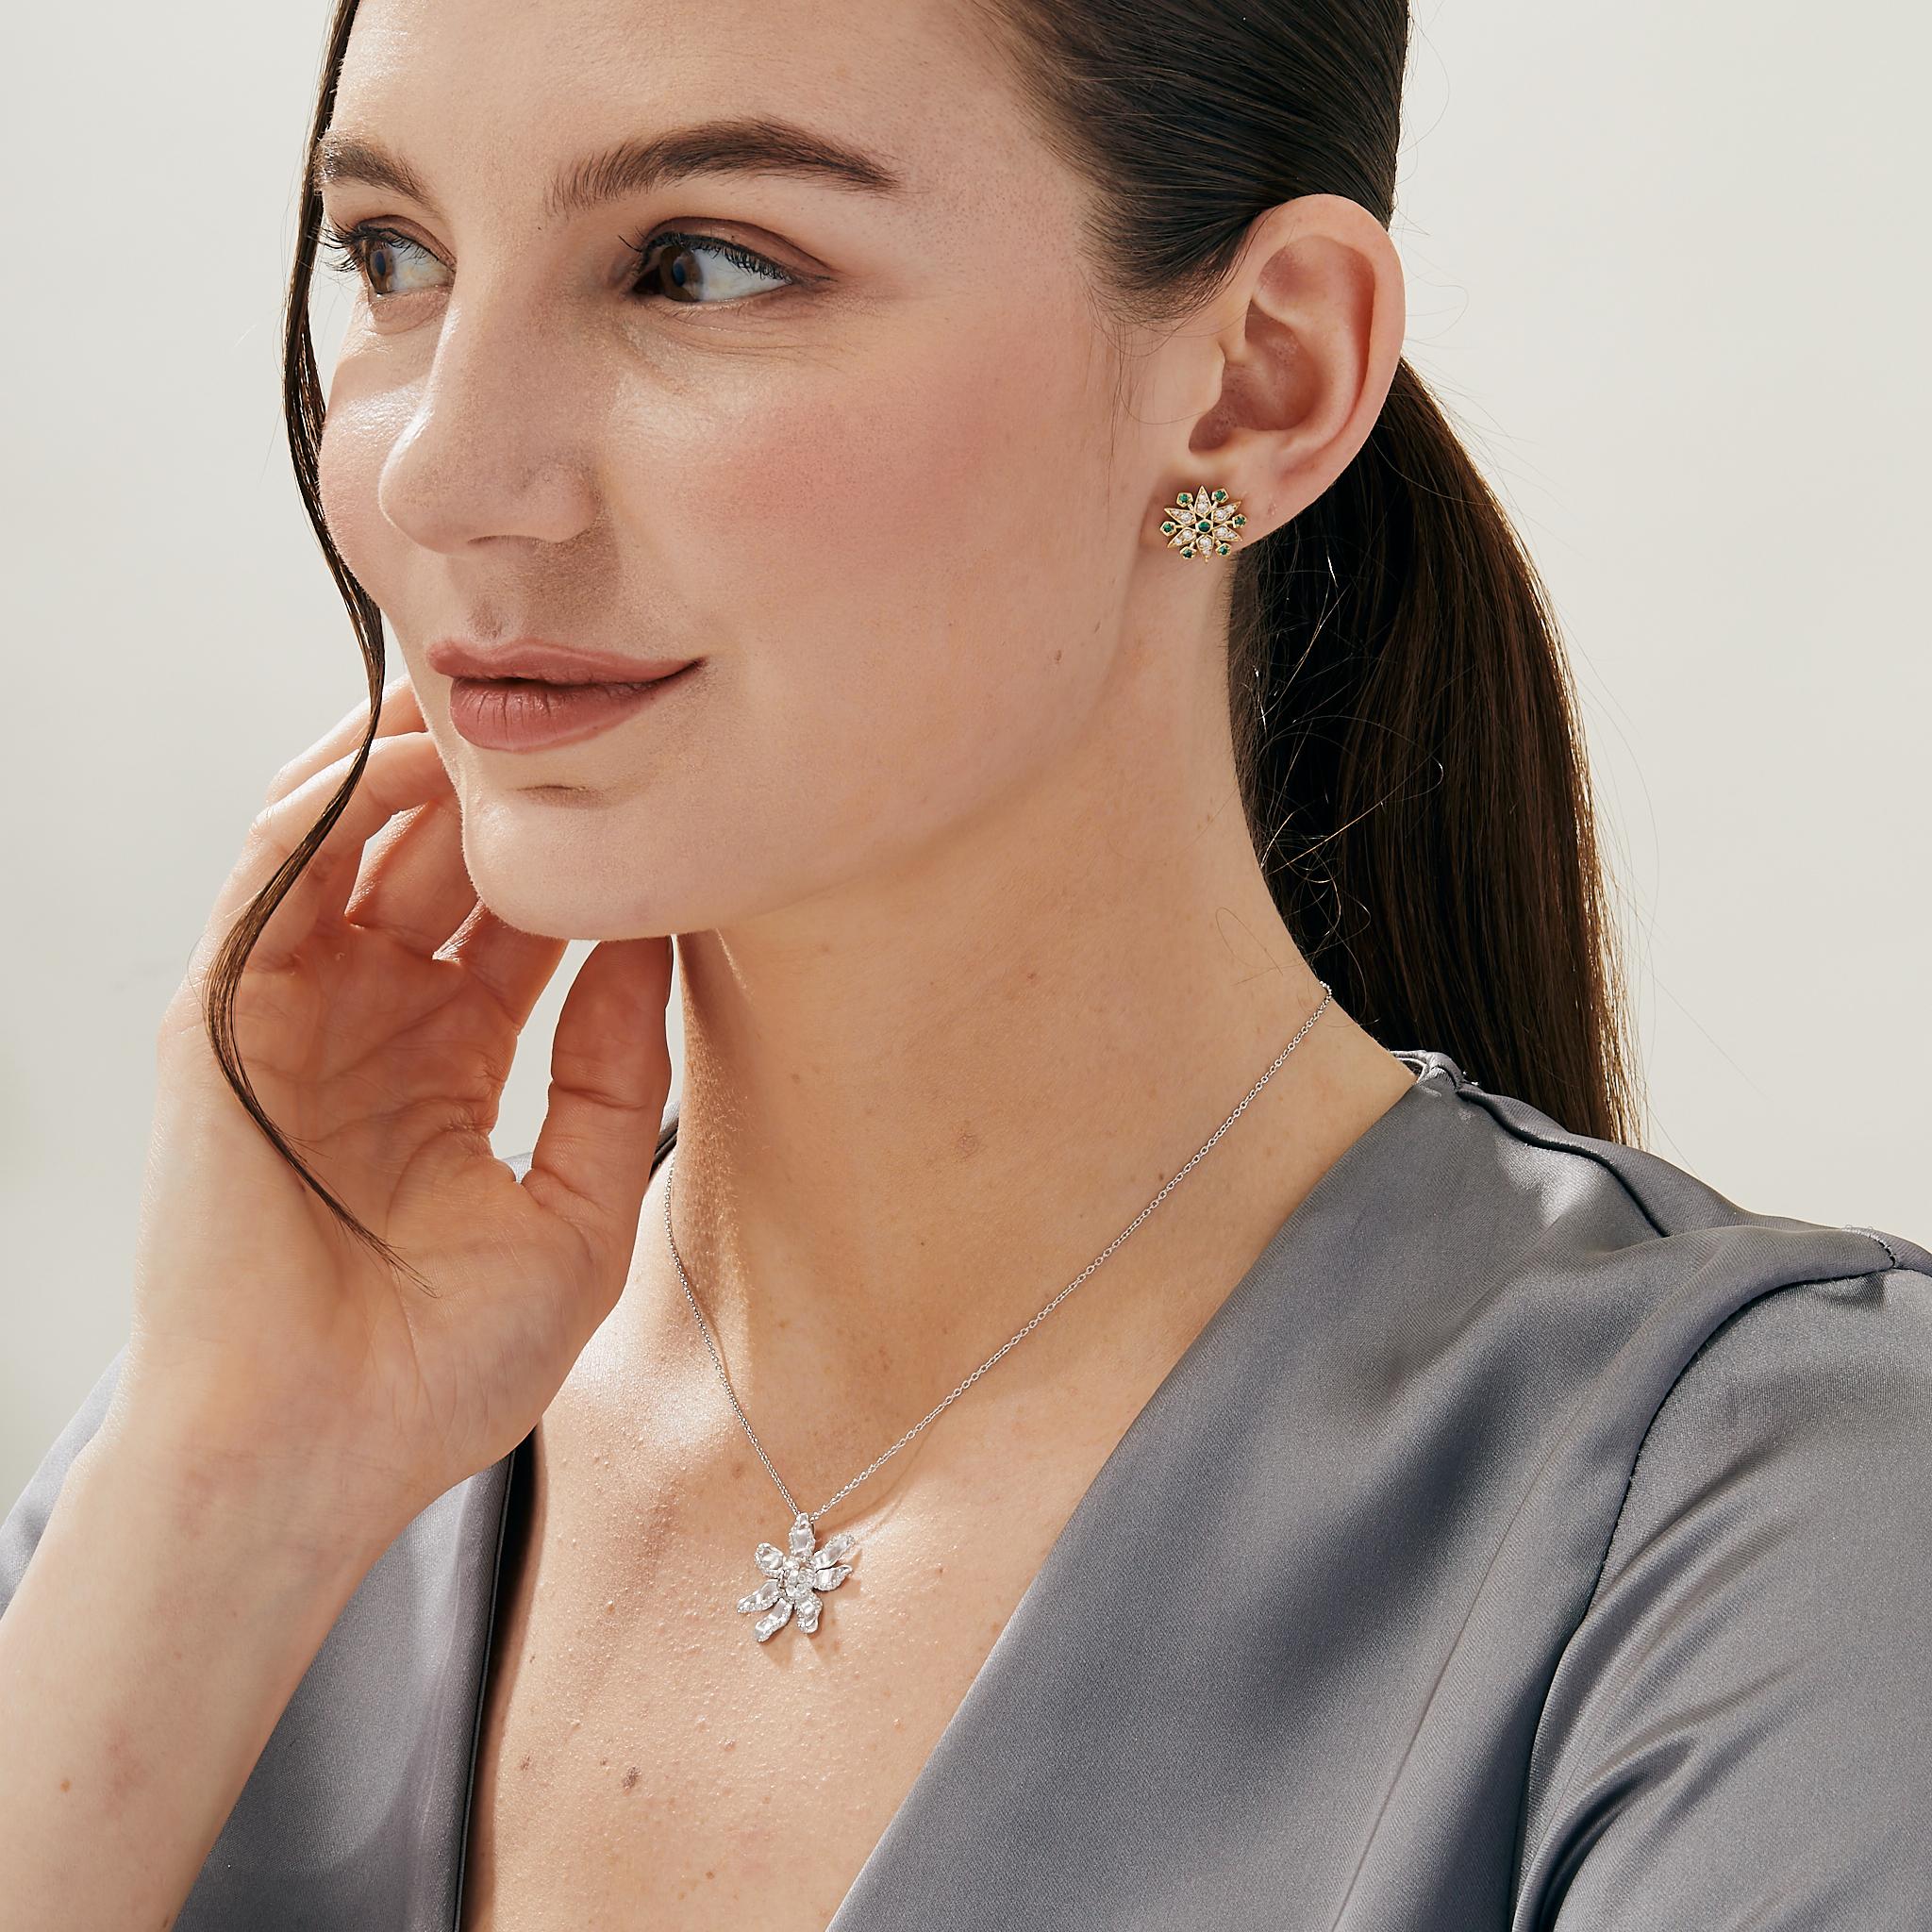 Created in 925 sterling silver
Satin finish Jardin flower pendant
Diamonds 0.40 carats approx.
18 inch necklace, can be worn at 16th and 17th inch

Crafted from 925 sterling silver with a satin-finish Jardin flower pendant, this exquisite necklace